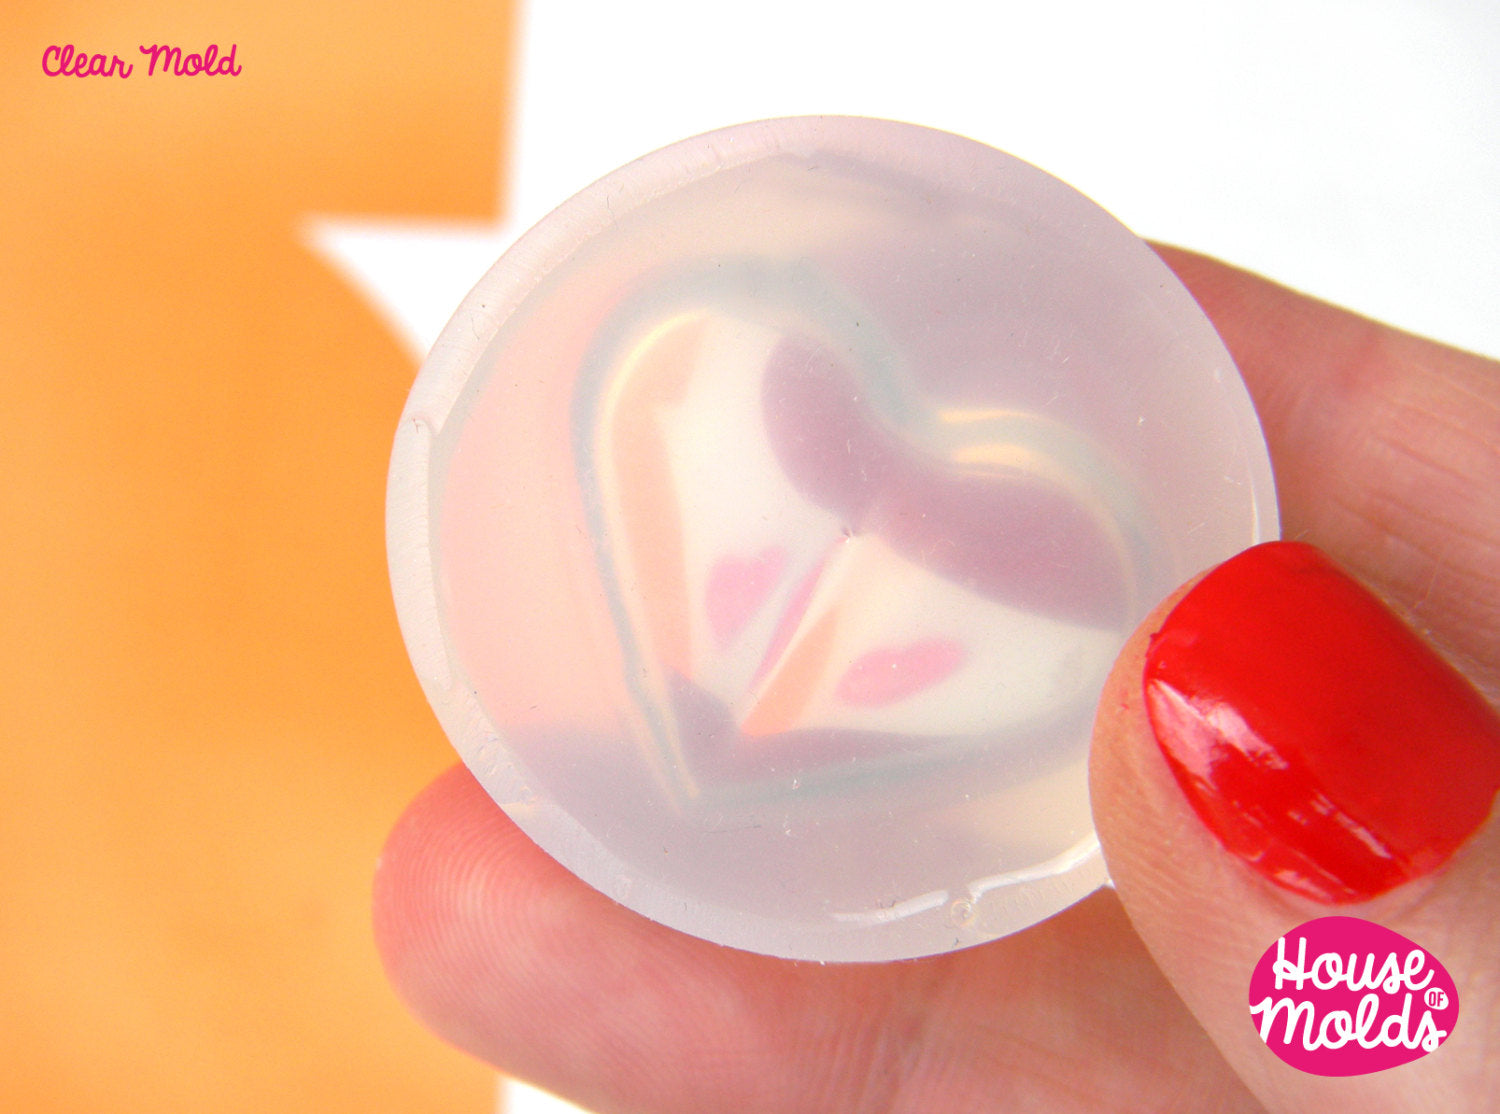 Shiny Puffy Heart Silicone Mold  Clear Puffy Heart Silicone Mold